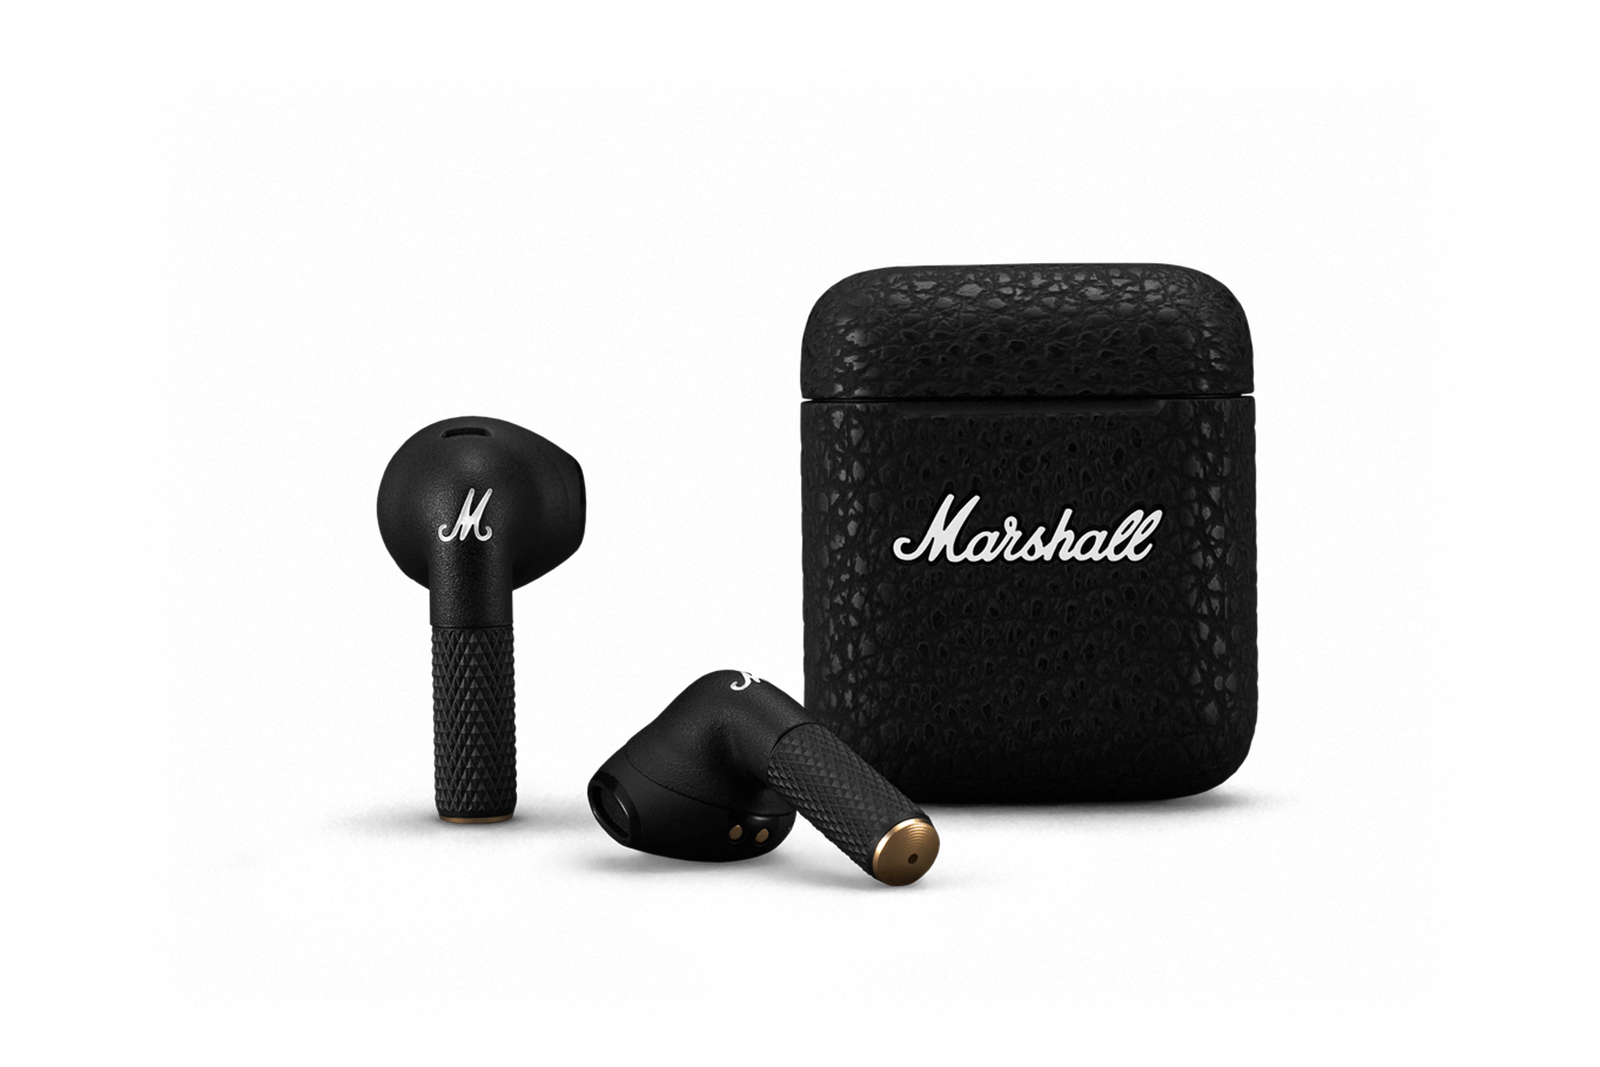 Marshall announces Motif ANC and Minor III - two new sets of earbuds photo 1